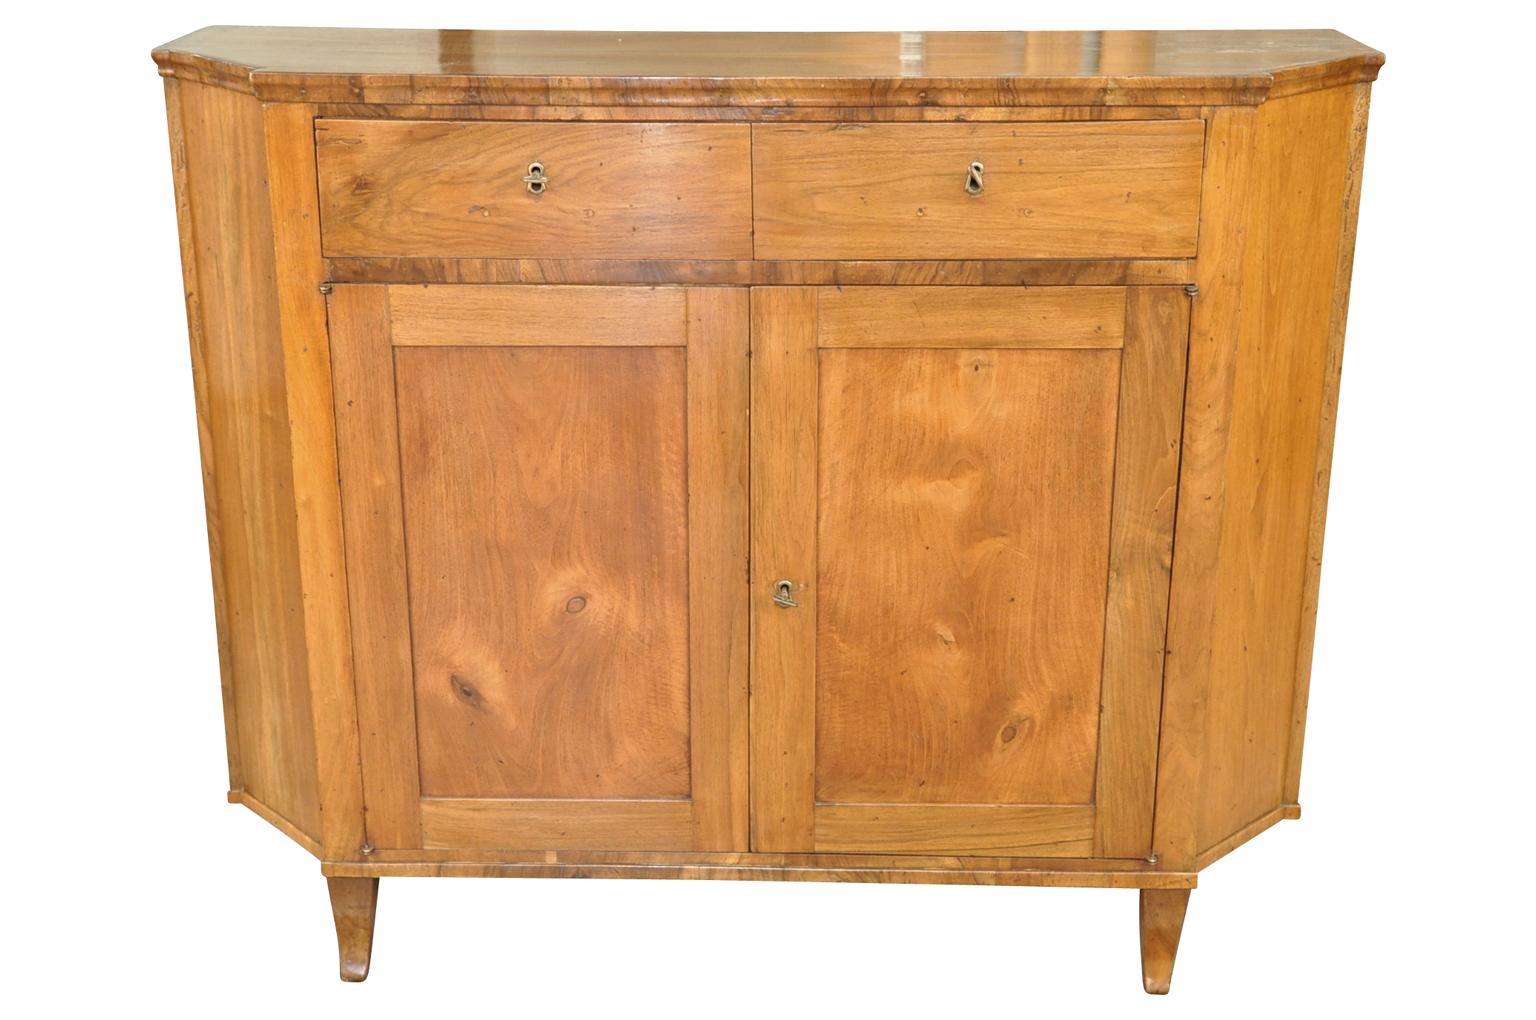 An outstanding and spectacular later 18th-early 19th century Venetian credenza. Wonderfully constructed from stunning walnut with very clean and elegant lines, canted sides, two drawers with interior shelf. Very rich and luminous patina.